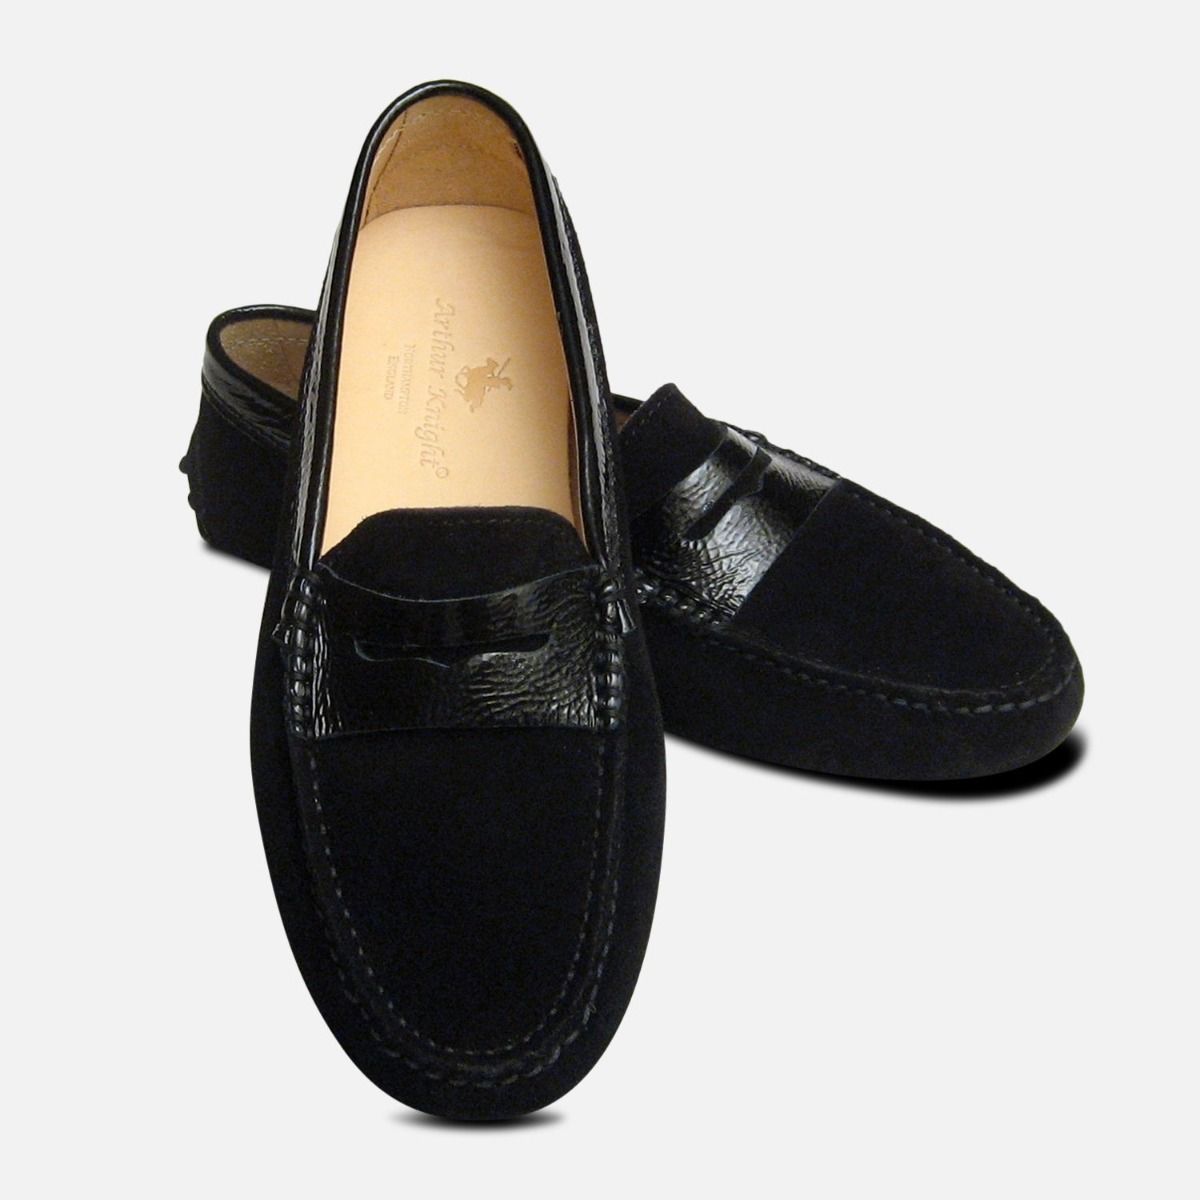 black suede driving shoes